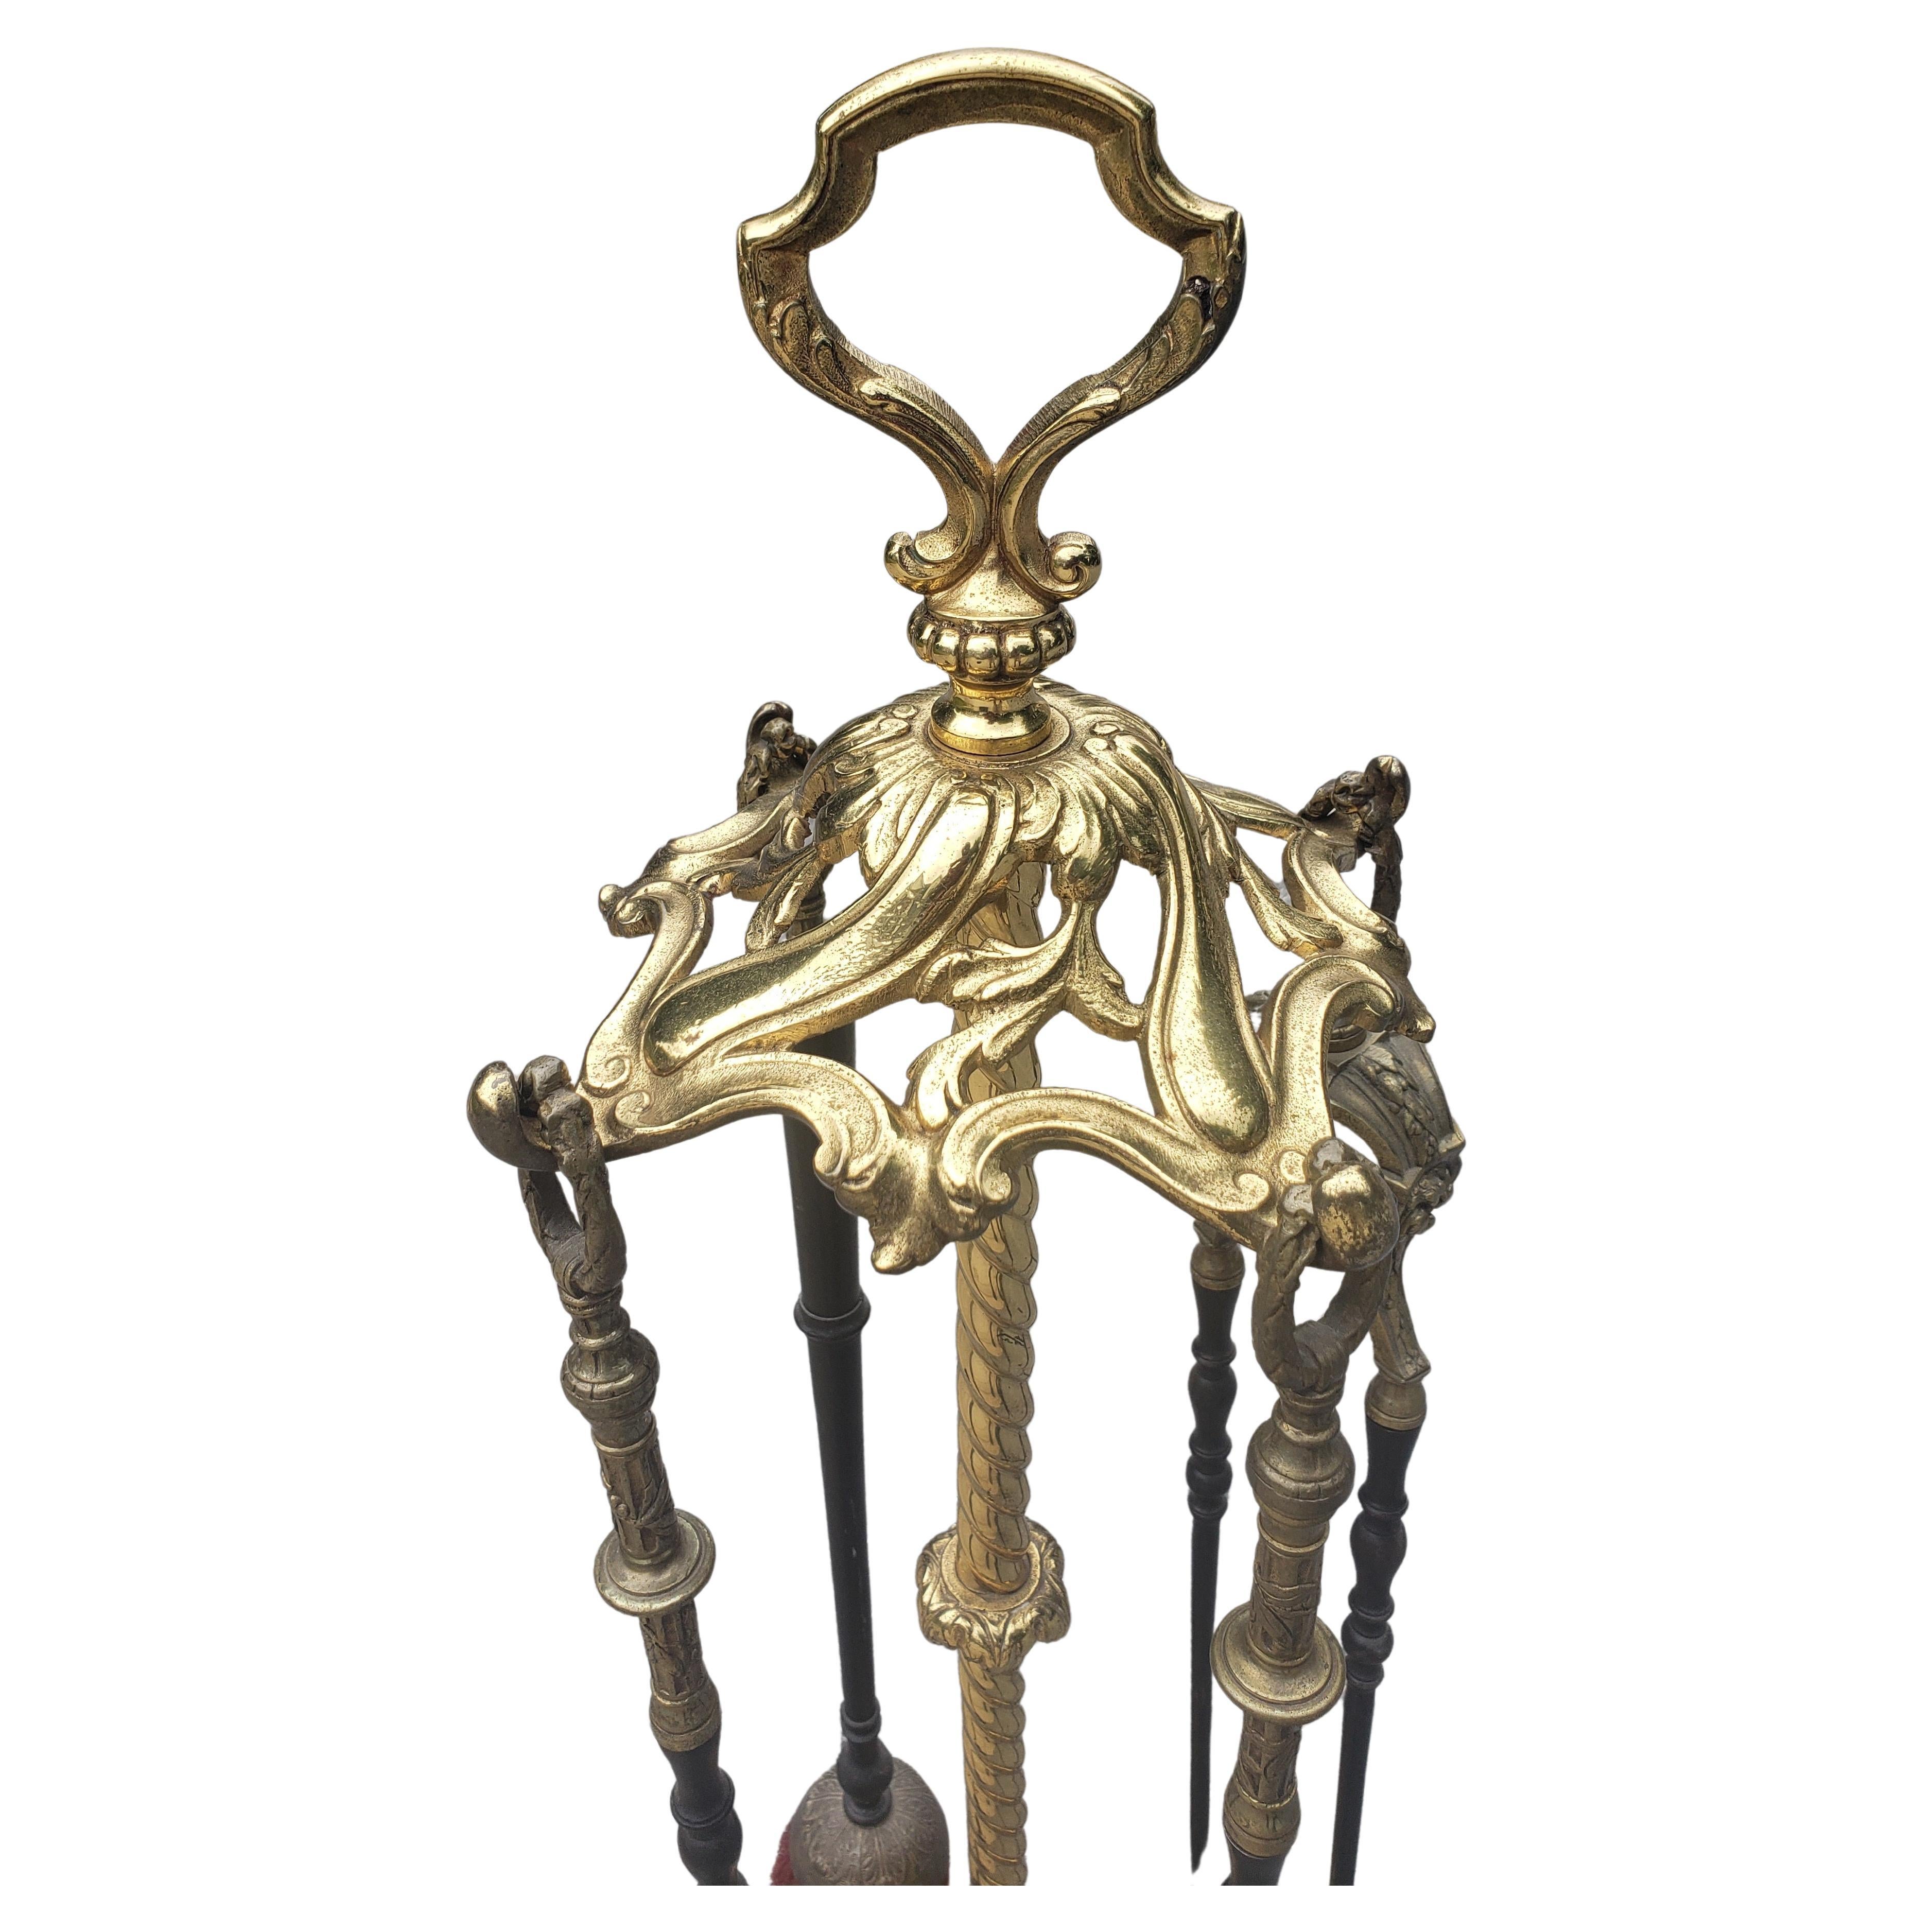 A monumental Louis XVI set of fireplace tools with stand. Extraordinarily crafted bronze stand will stand out in your fireplace decor. Comes with a complimentary primitive cast iron fireplace waffle maker in near perfect condition, unused.